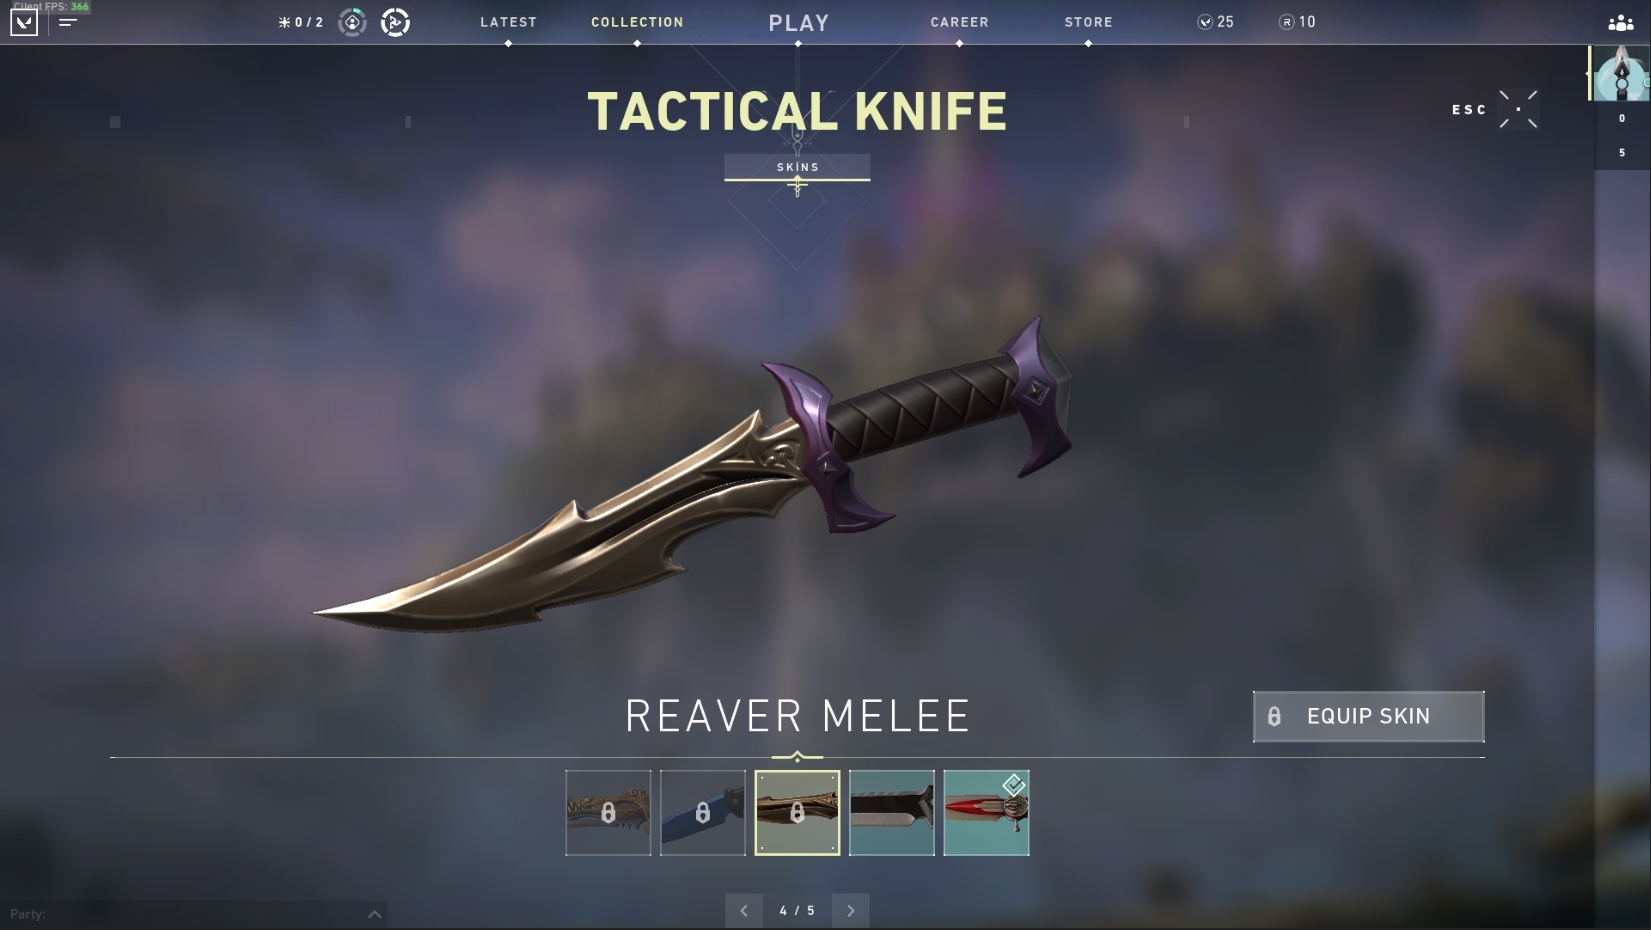 Hei! 43+ Lister over Celestial Skins Valorant Knife: They can be bought